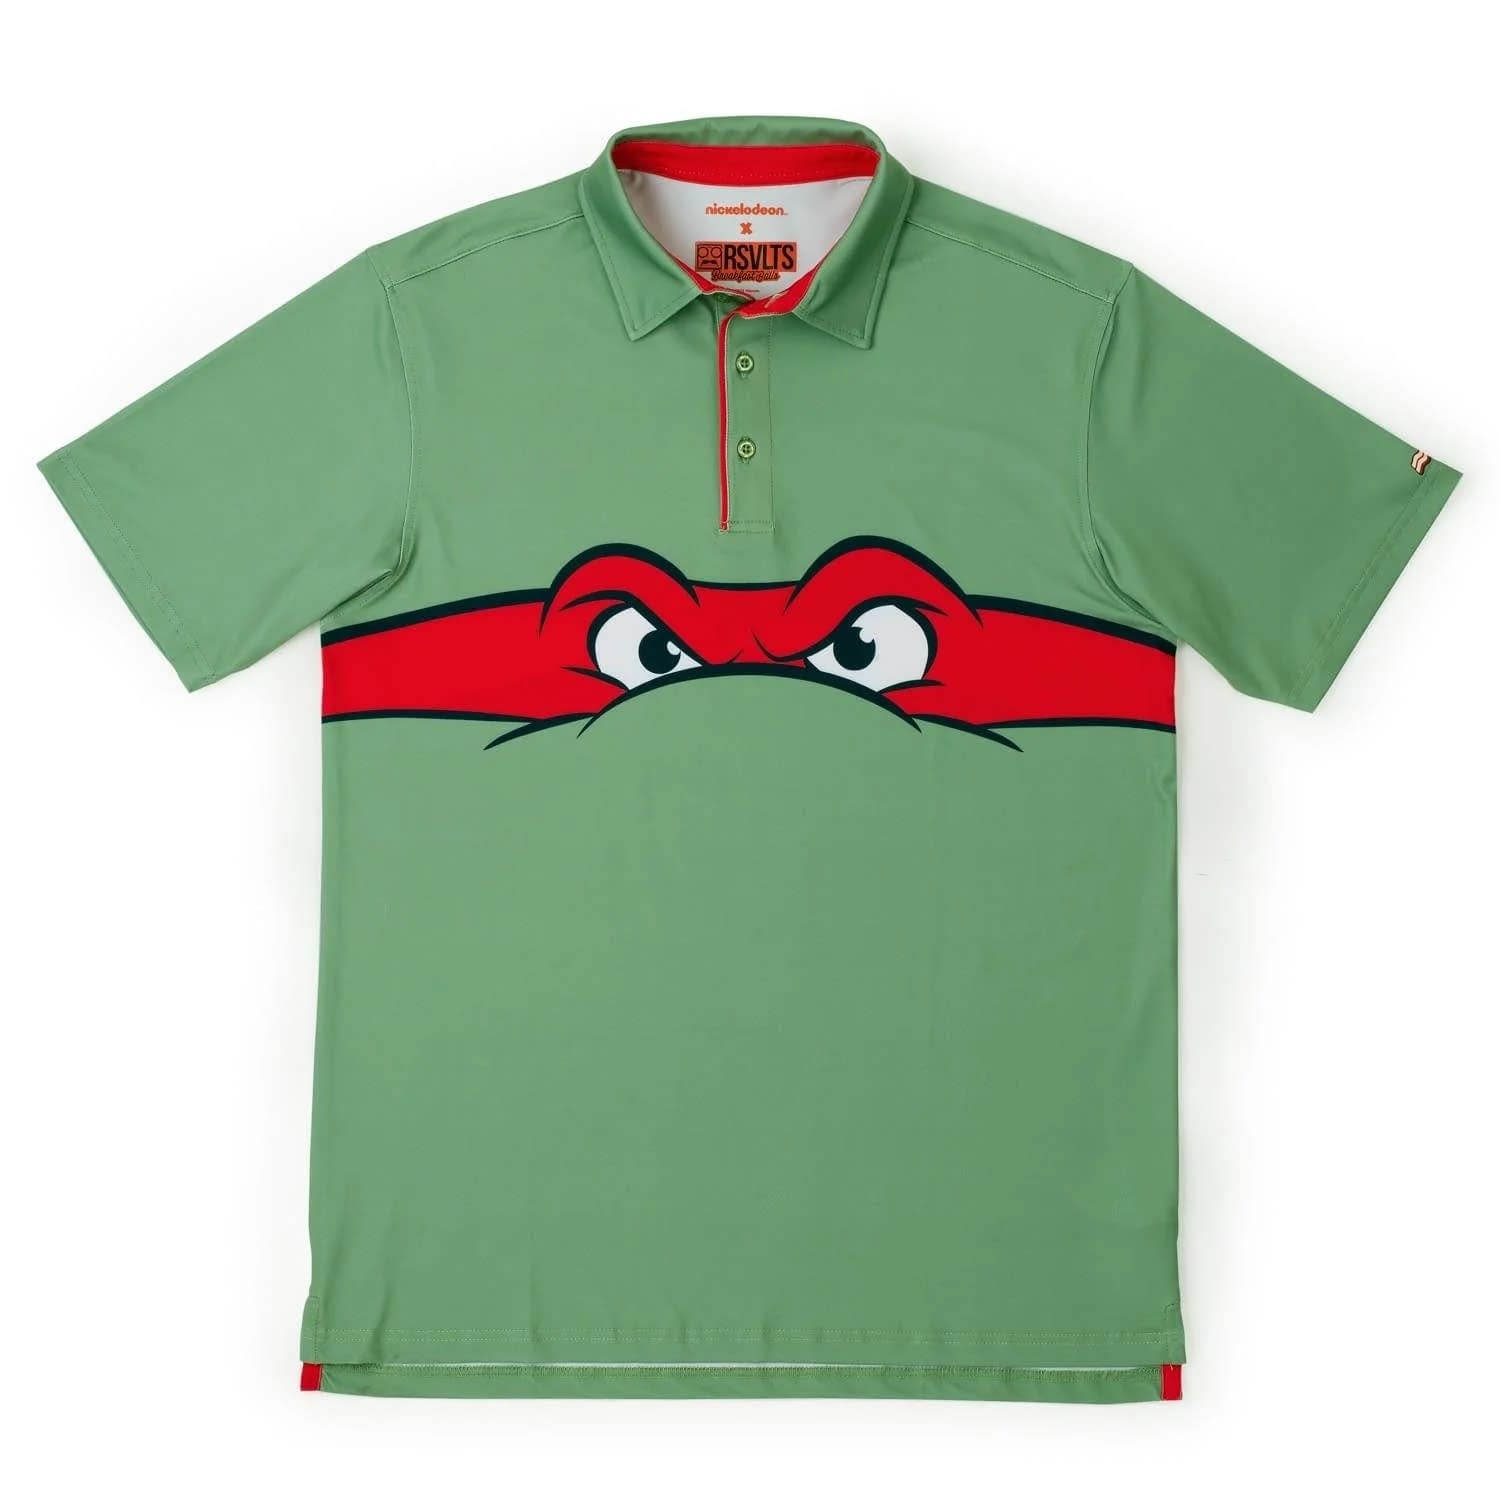 It's a Cowabunga Summer with RSVLTS Breakfast Balls All-Day Polos 